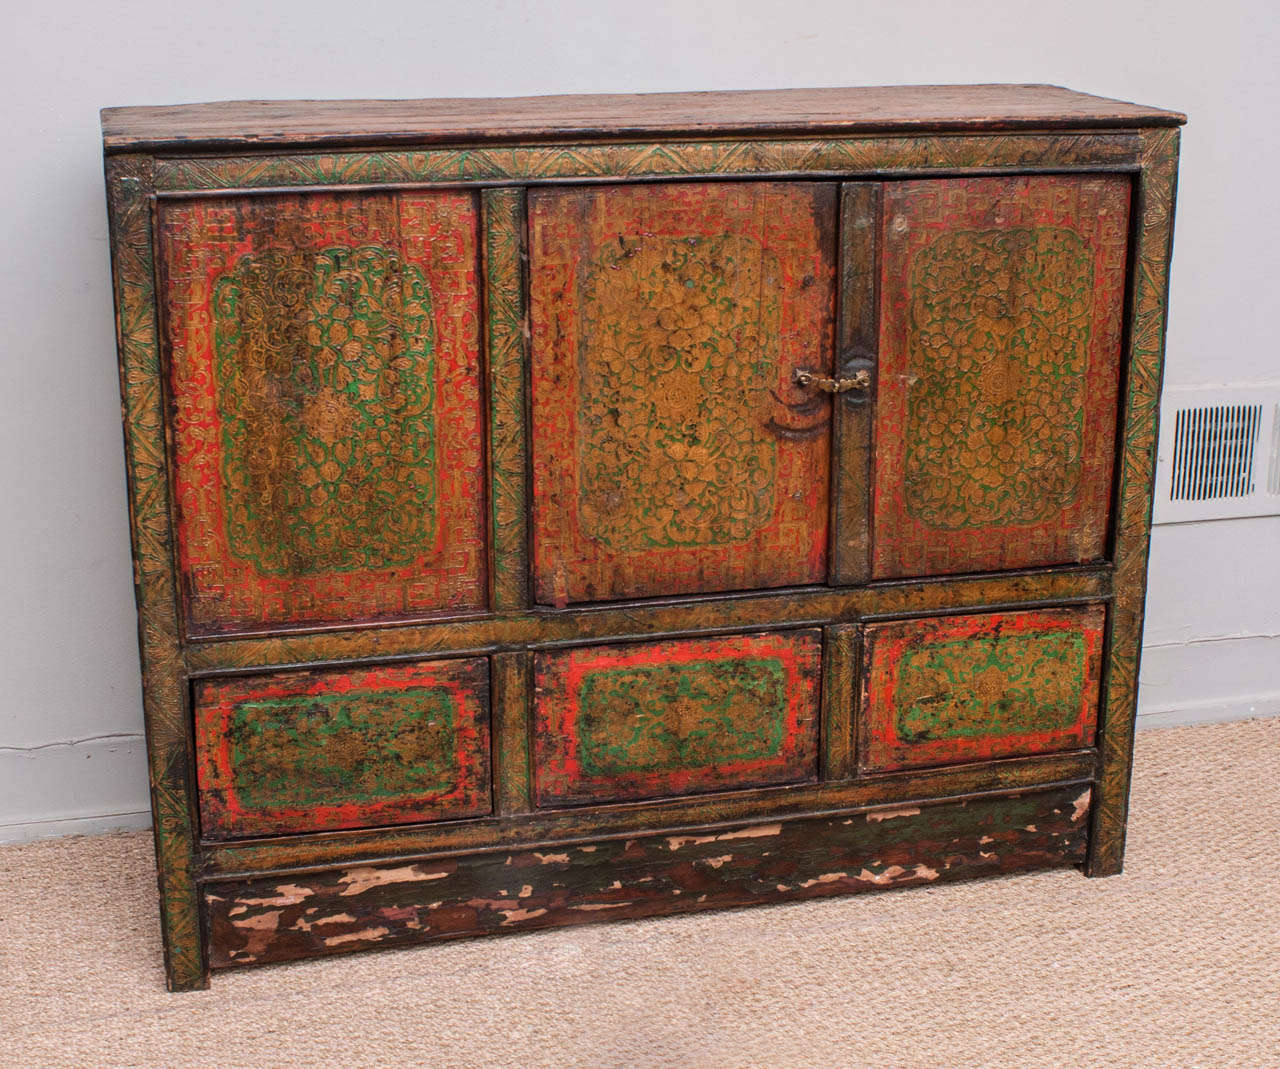 Hand painted and handcrafted Tibetan cabinet with original red and green paint with traces of gold. This cabinet has a two door opening with interior shelf, plus three 